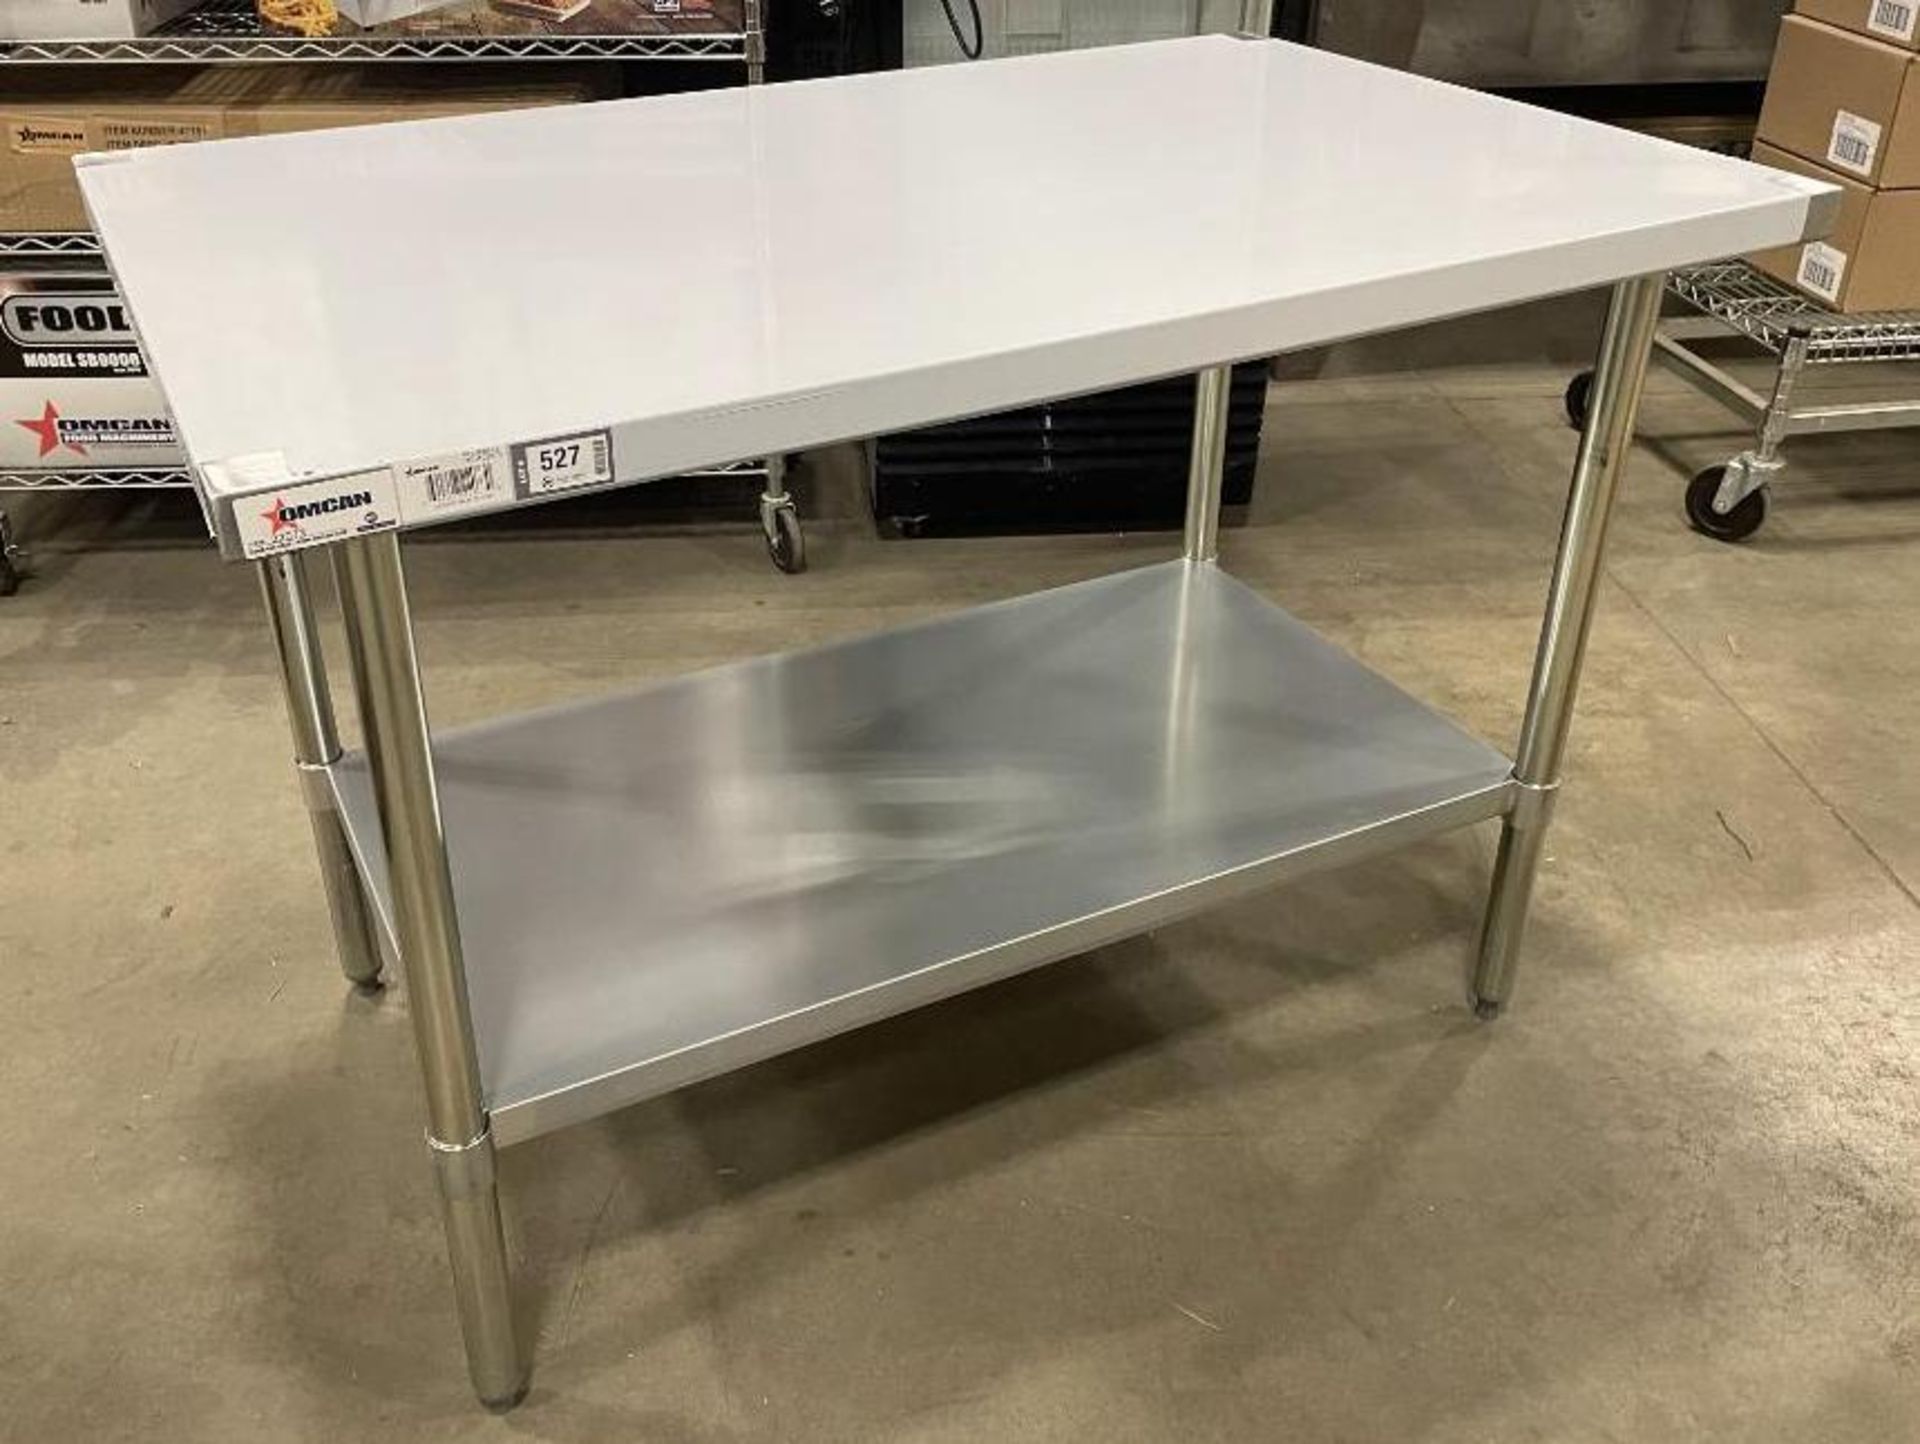 NEW 30" X 48" STAINLESS STEEL WORK TABLE, OMCAN 22073 - Image 2 of 4